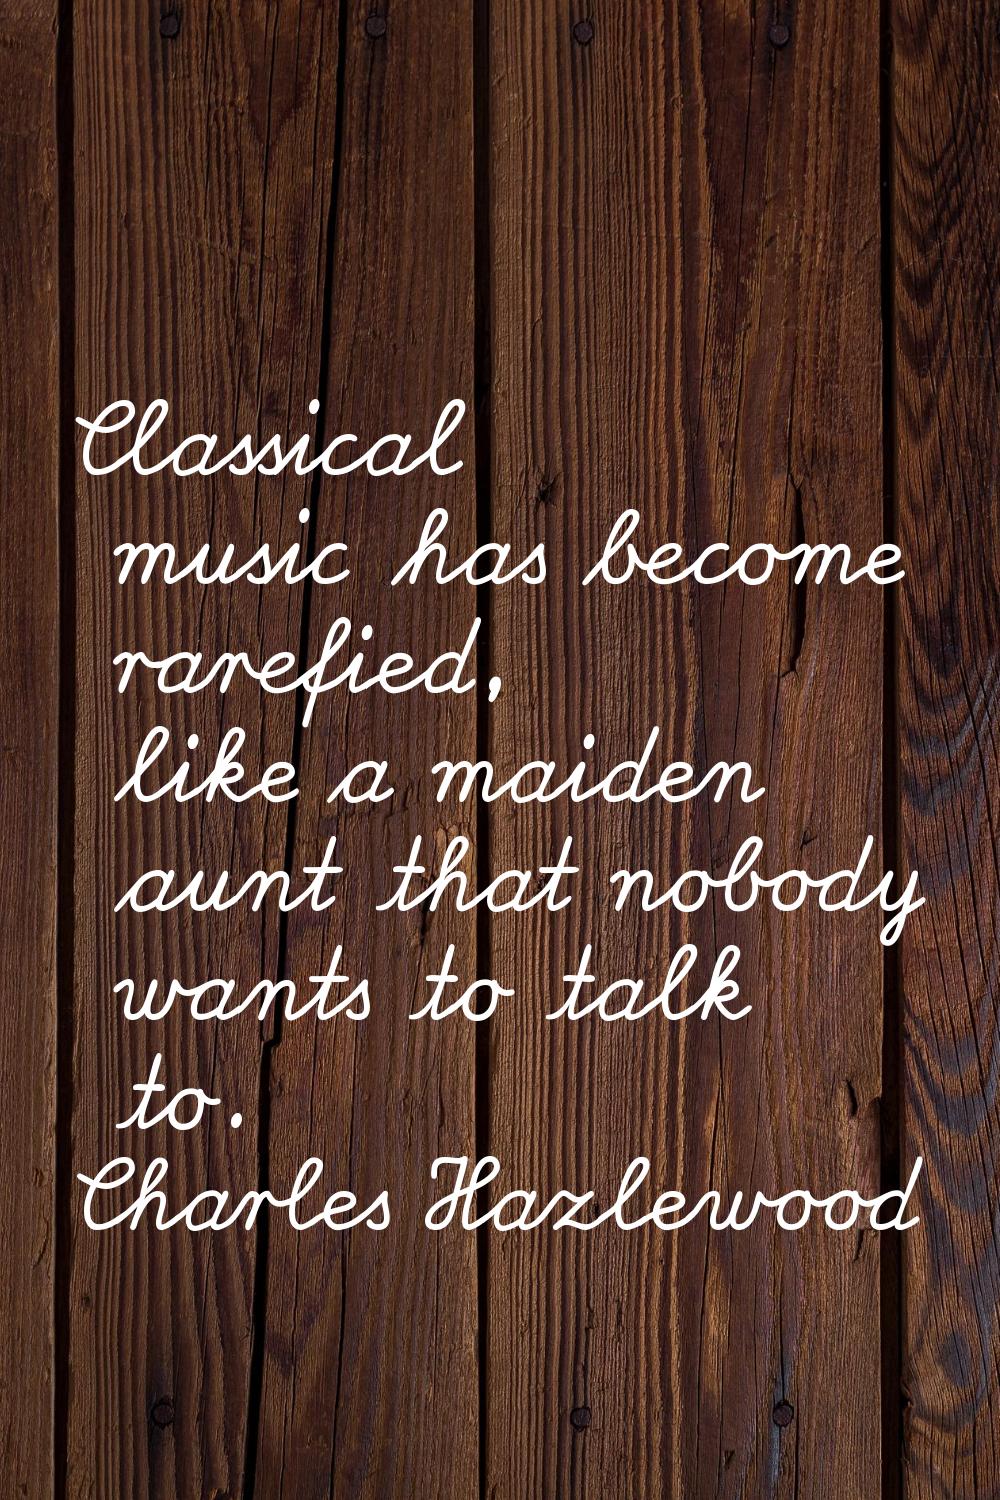 Classical music has become rarefied, like a maiden aunt that nobody wants to talk to.